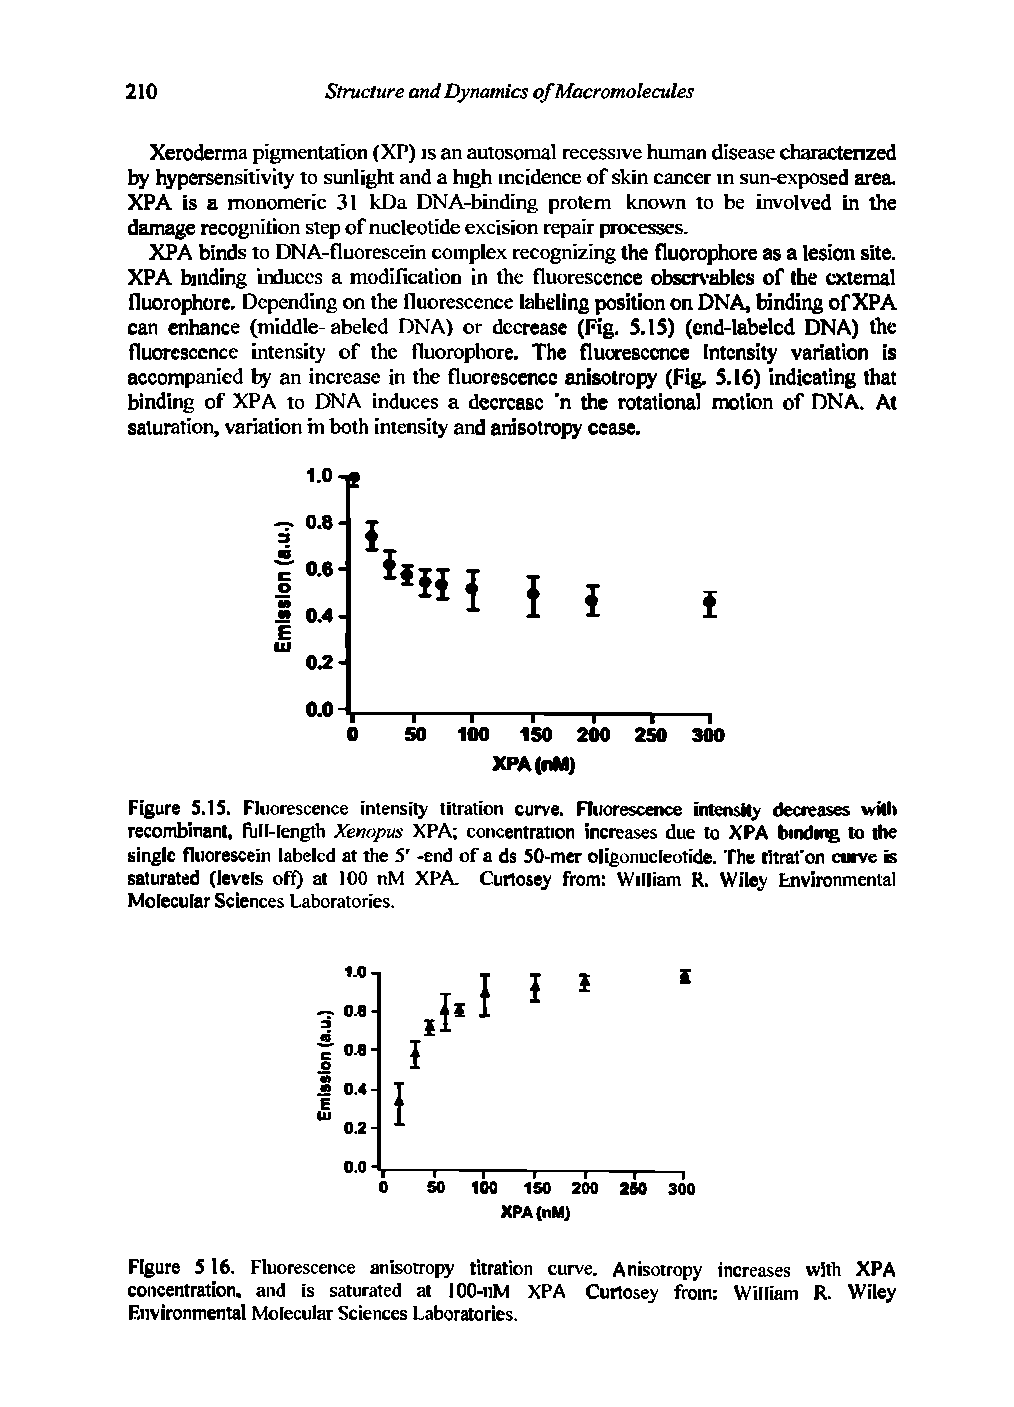 Figure S.1S. Fluorescence intensity titration curve. Fluorescence intensity decreases wMi recombinant, ftjll-lergth Xenopus XPA concentration increases due to XPA binding to the single fluorescein labeled at the 5 -end of a ds 50-mer oligonucleotide. The titral on curve is saturated (levels off) at 100 nM XPA Cutlosey from William R. Wiley tnvironmental Molecular Sciences Laboratories.